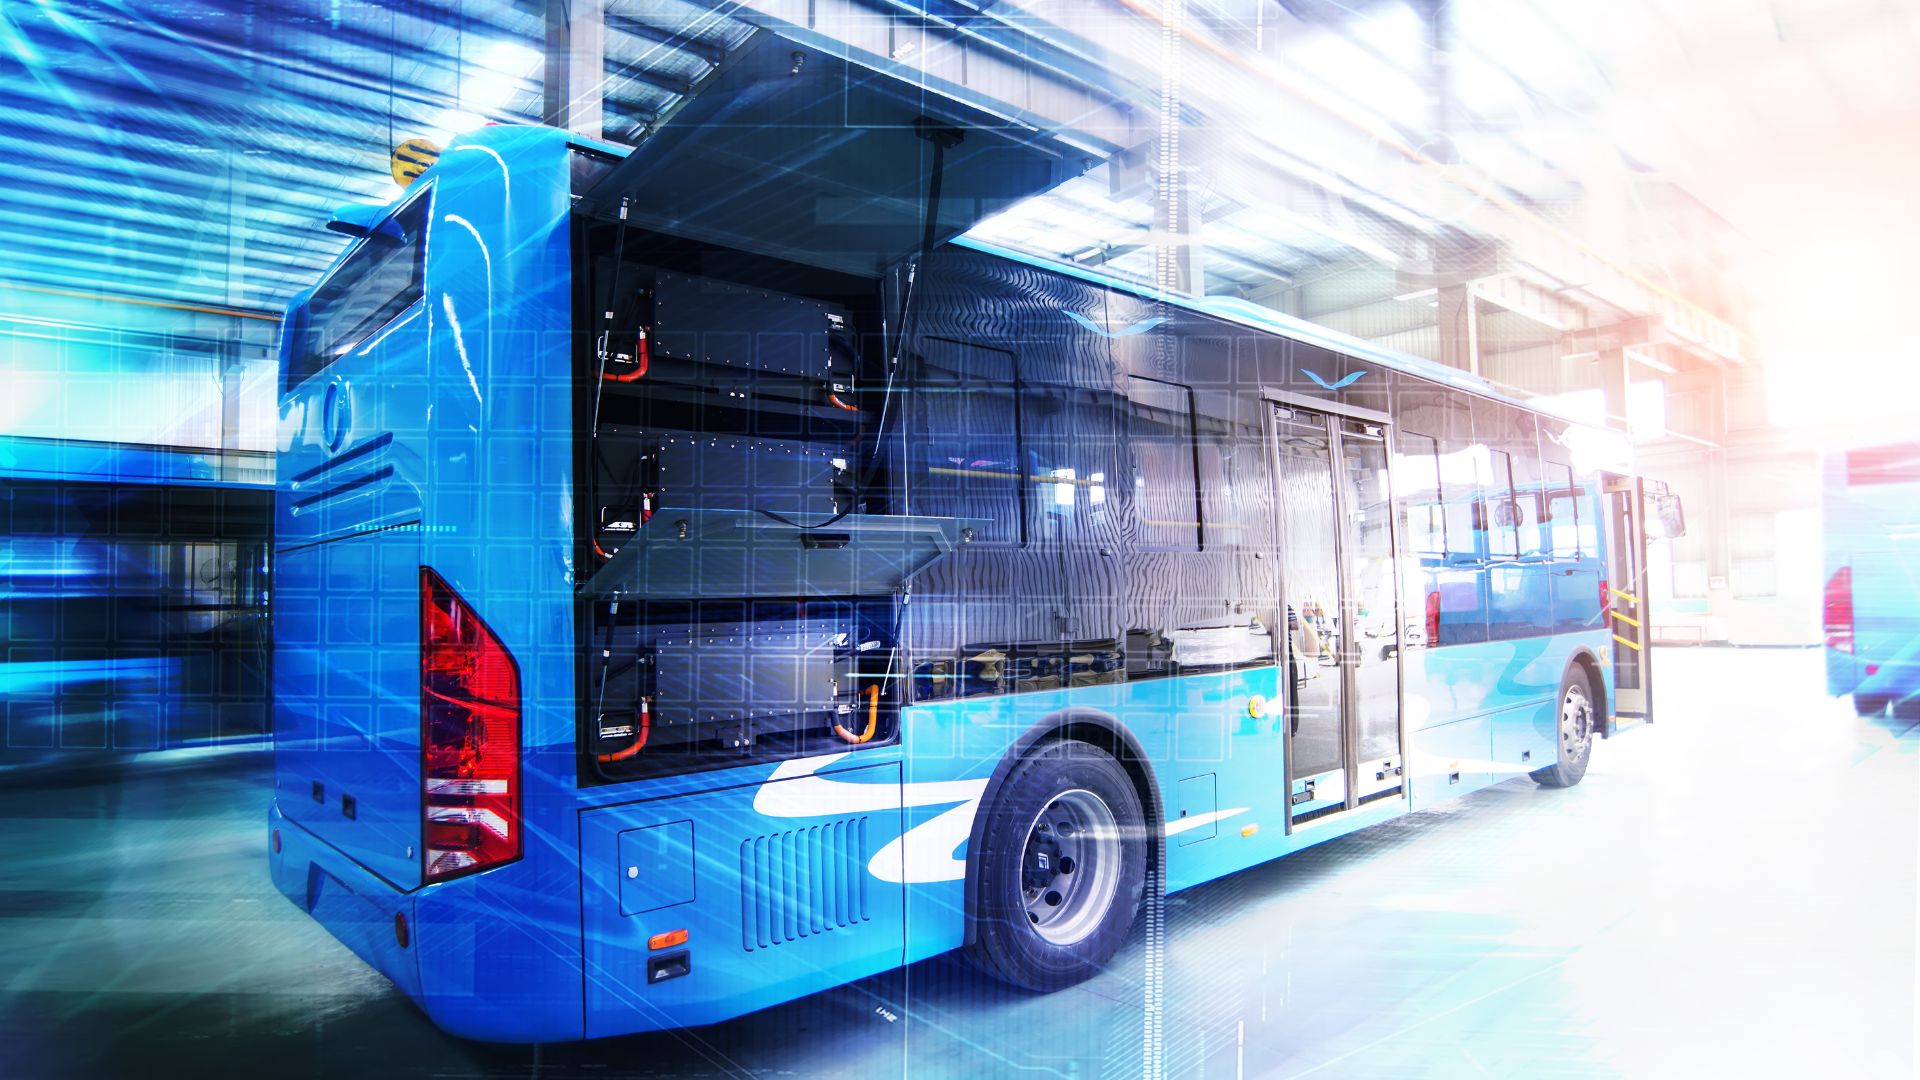 Lagos is testing electric buses, can they withstand the city's notorious traffic?